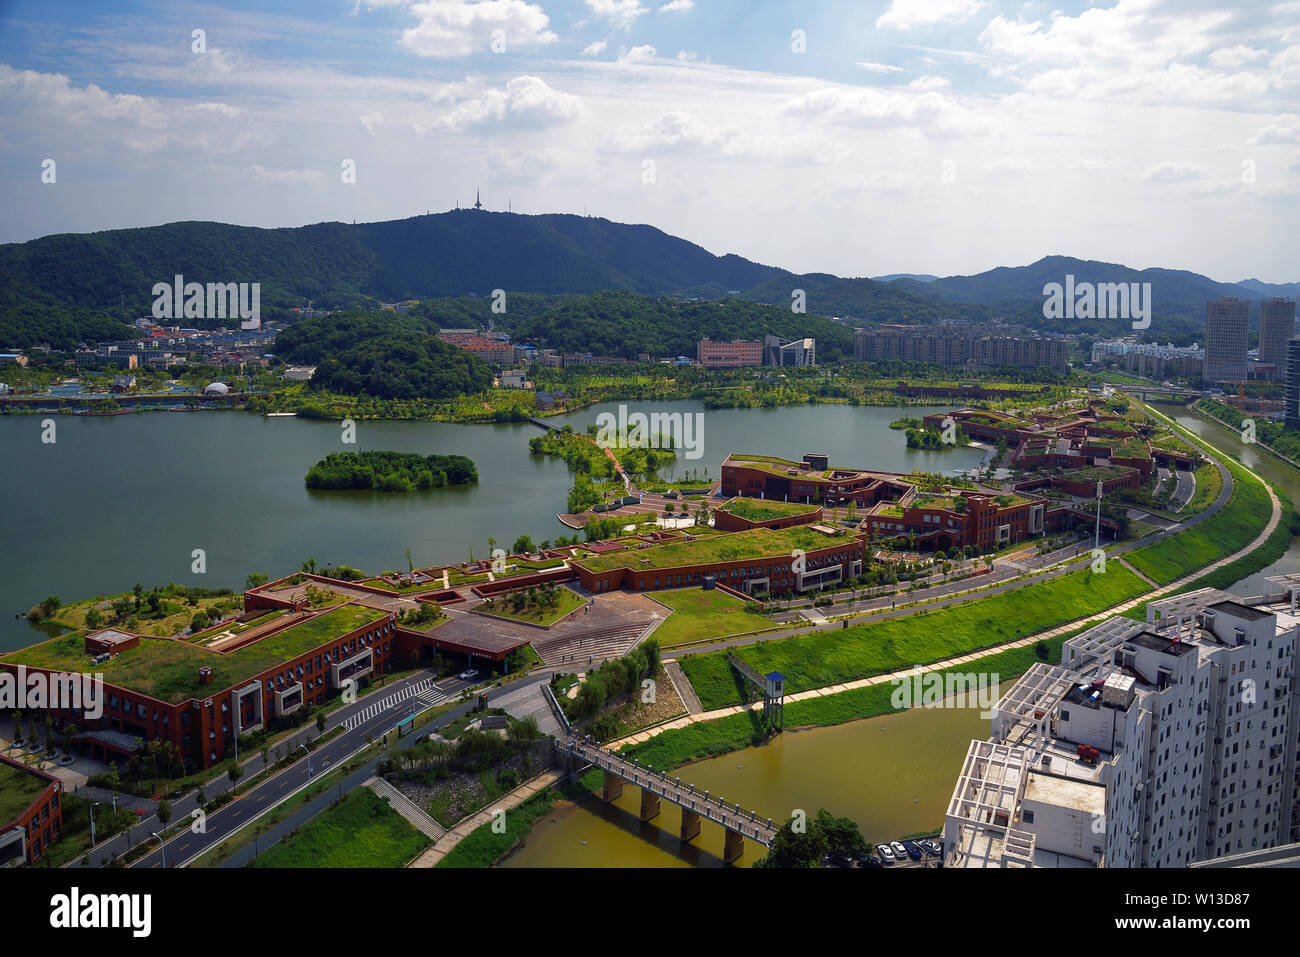 City Scenery of West Lake Cultural Park in Changsha Stock Photo